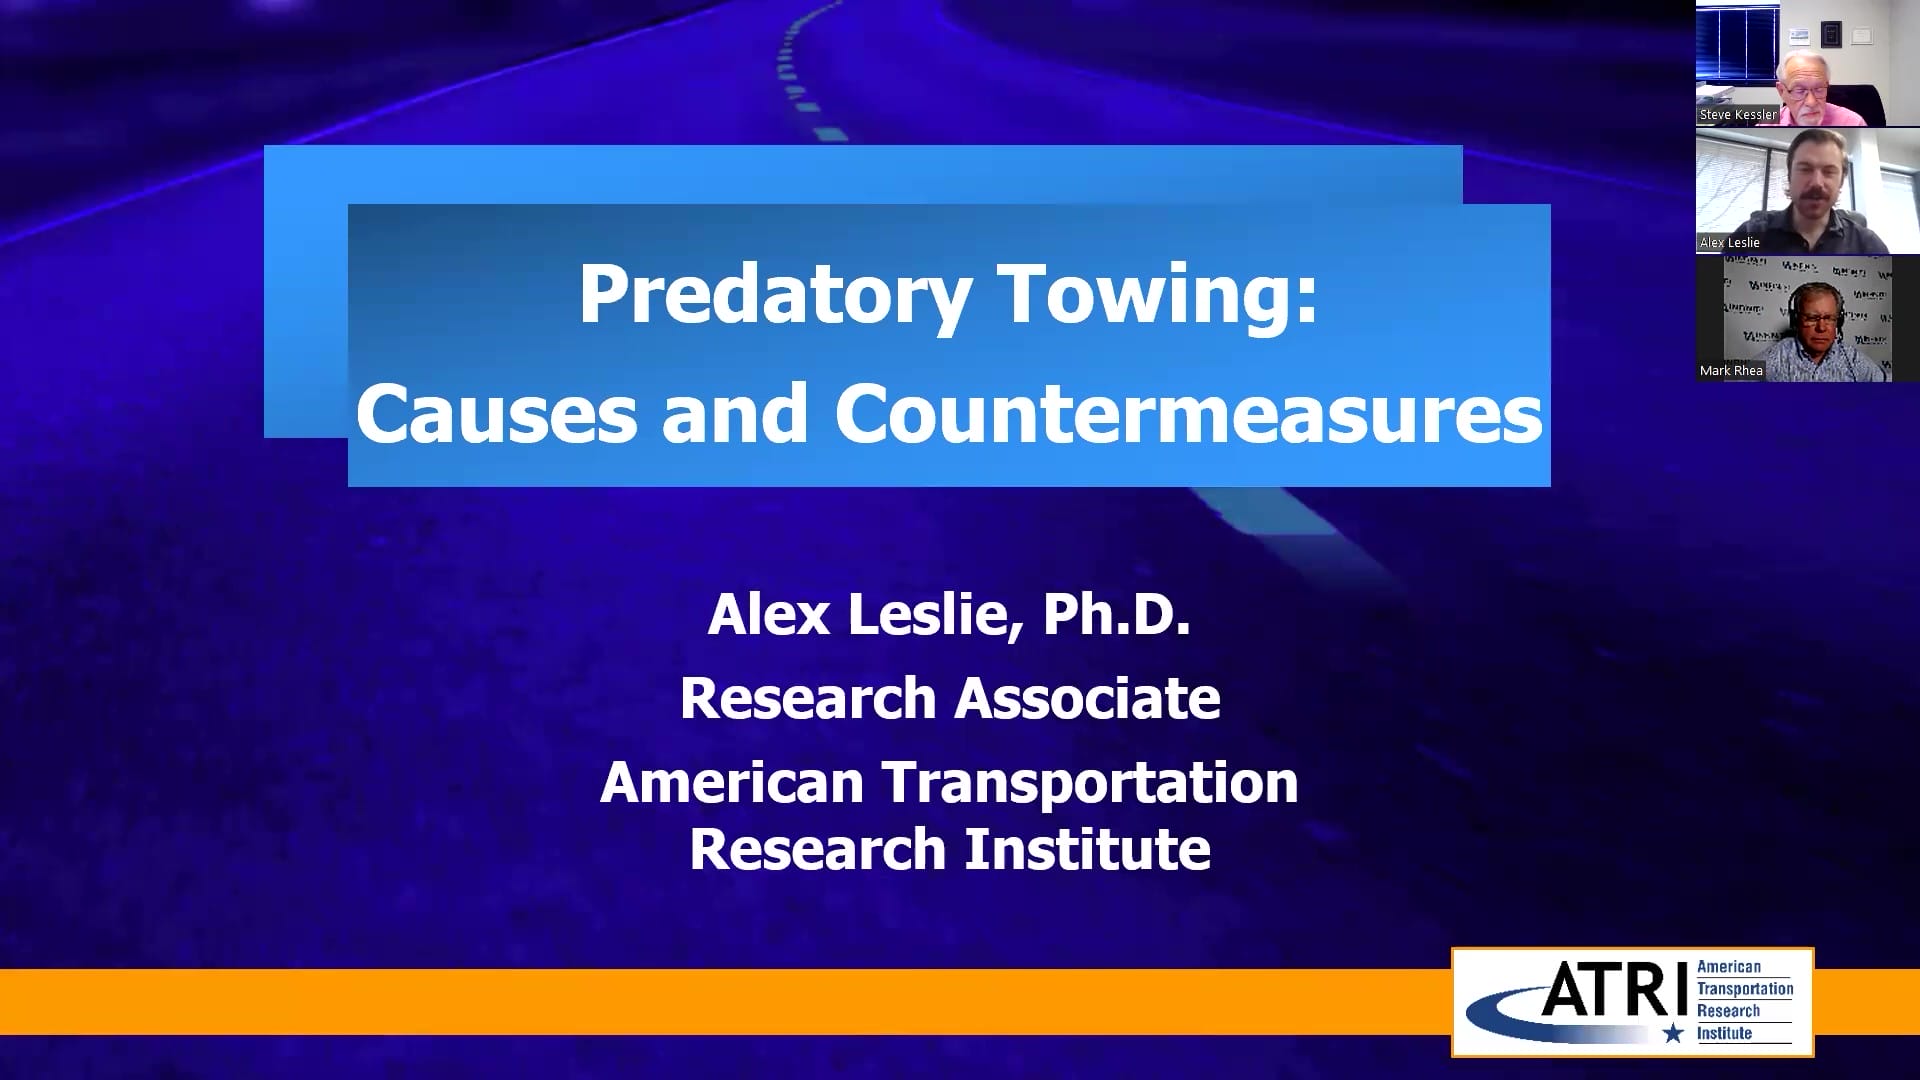 ATRI’s Research on Predatory Towing Causes and Countermeasures